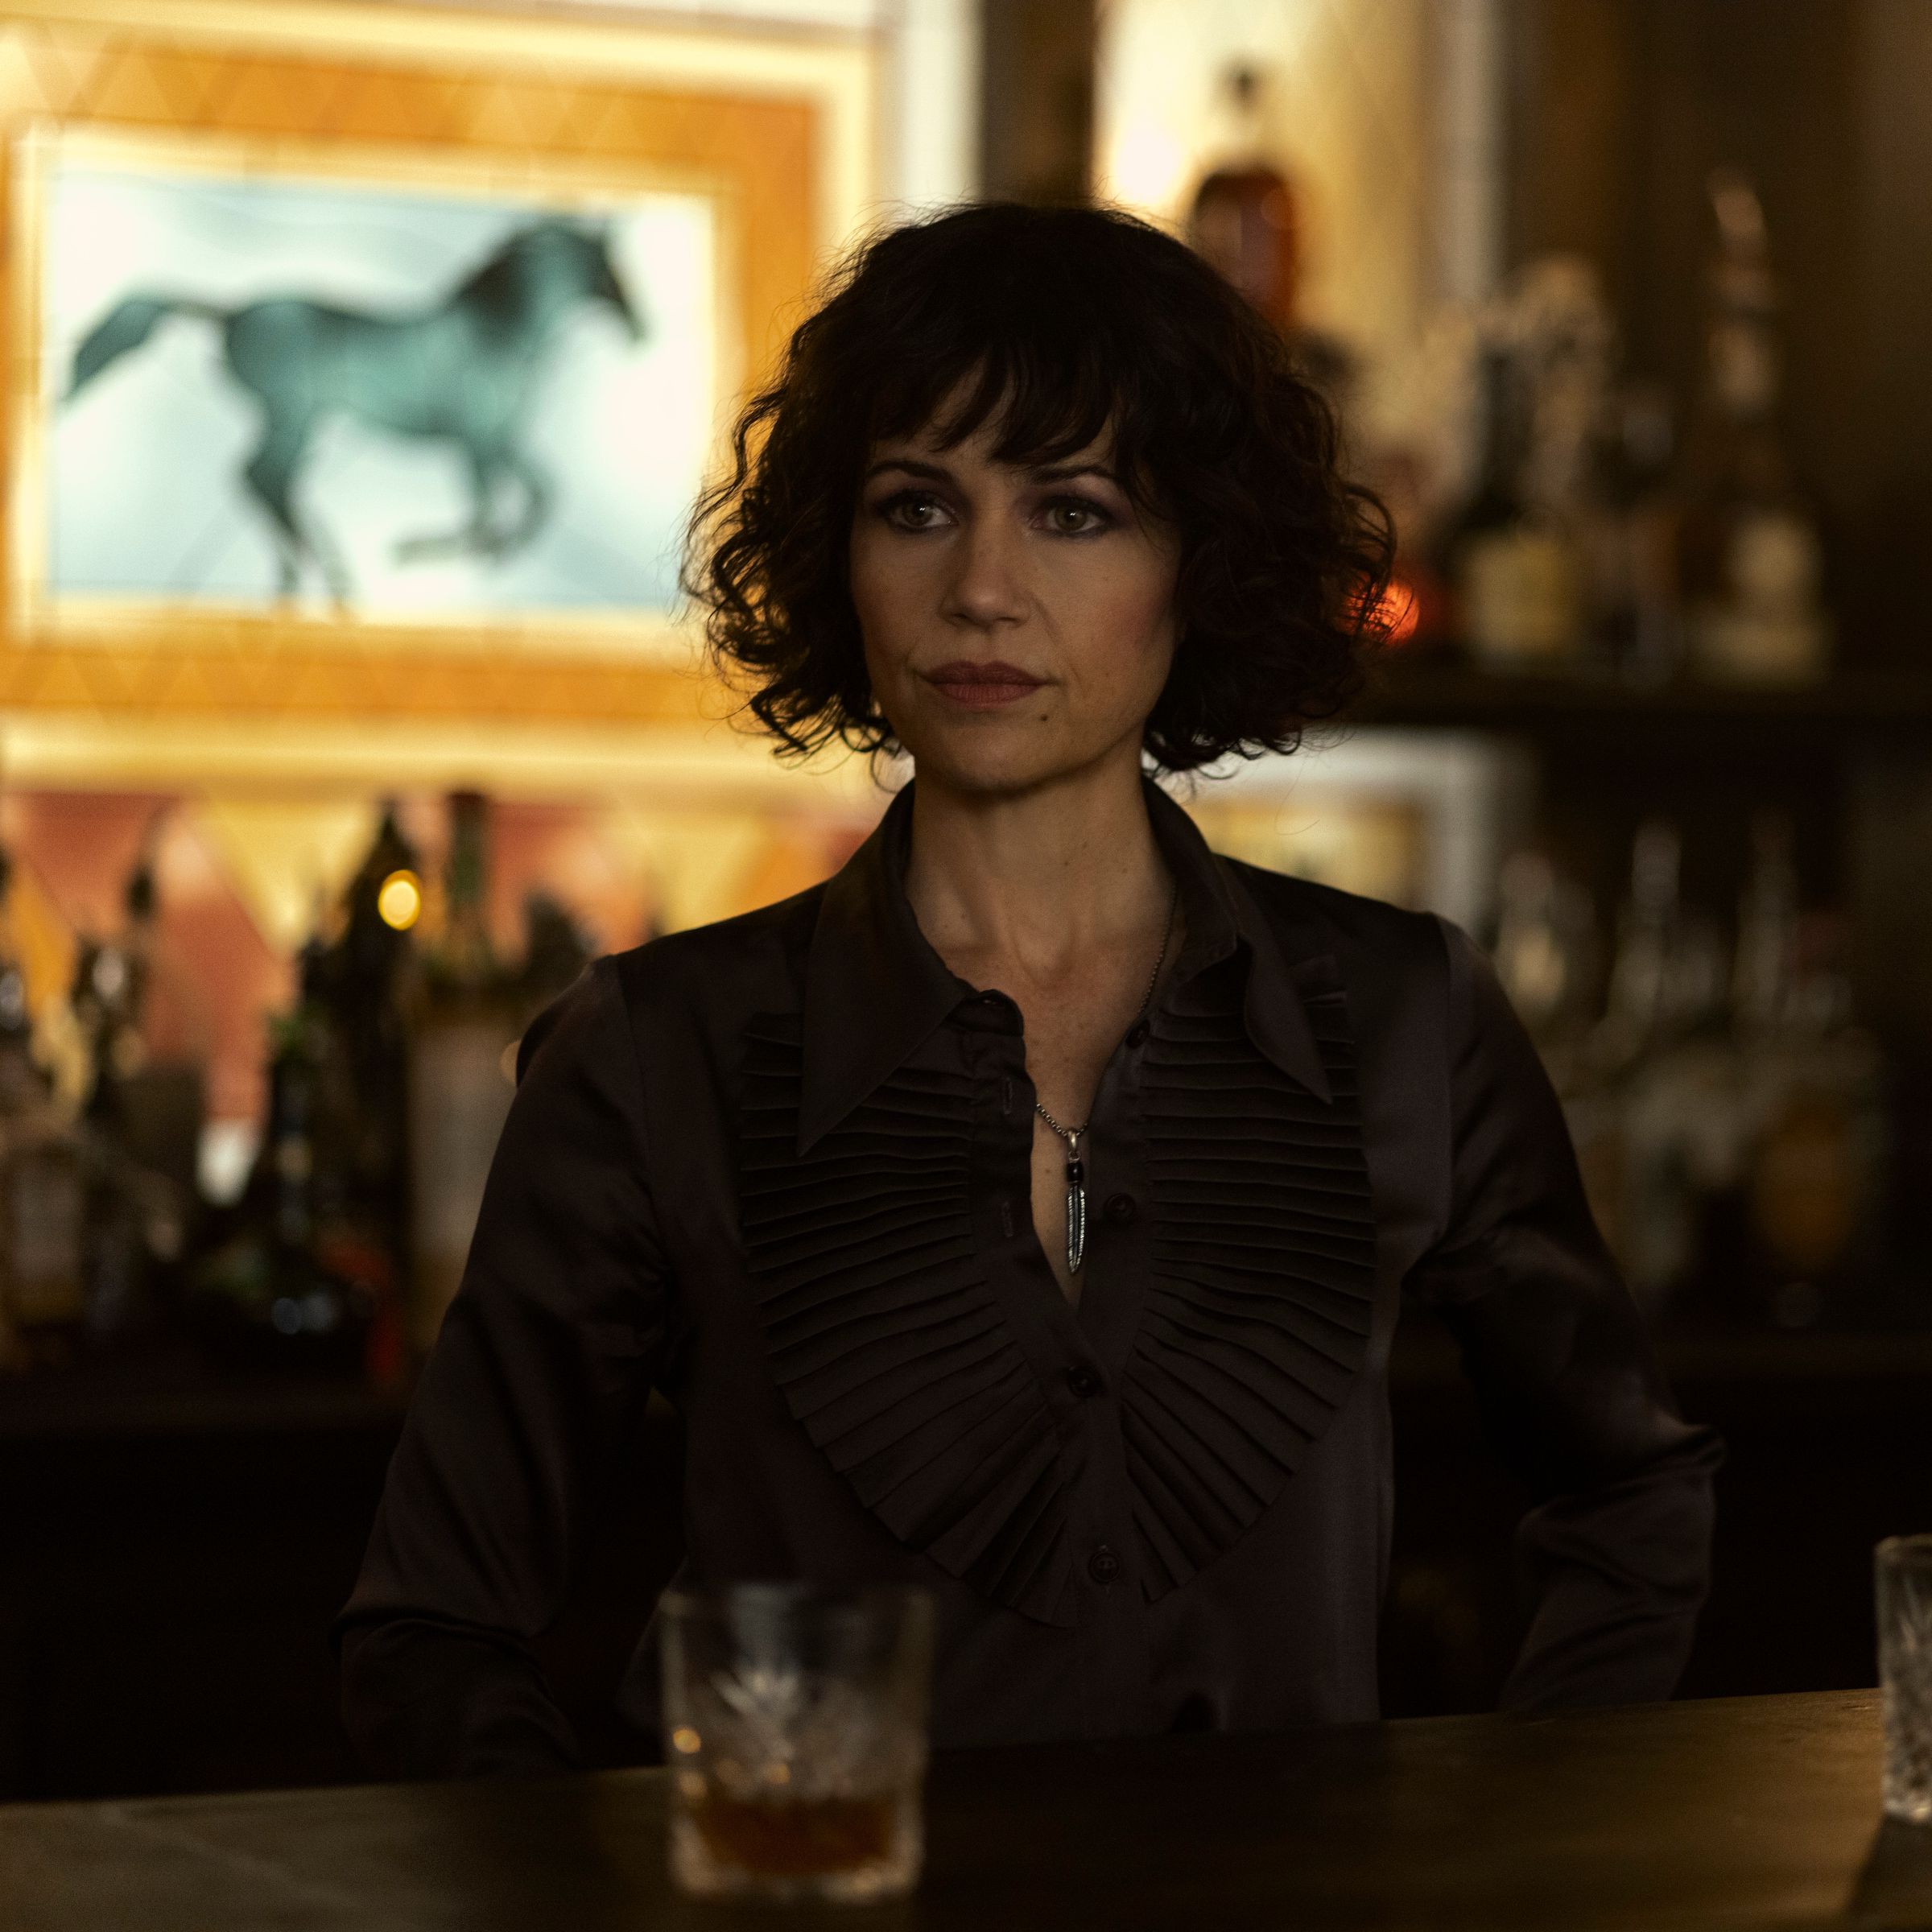 A still photo of Carla Gugino in the Netflix TV series The Fall of the House of Usher.